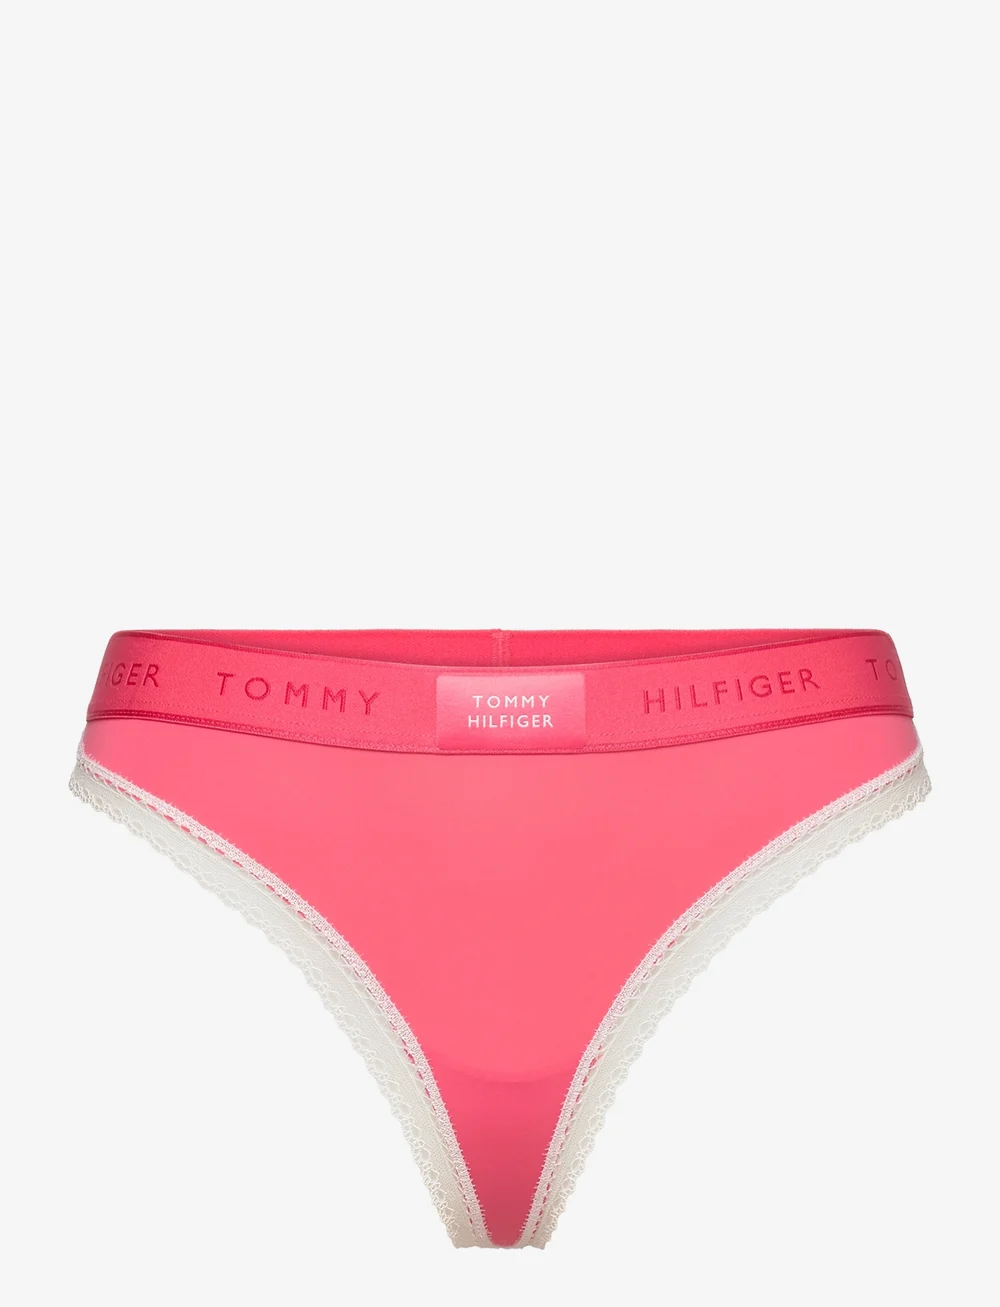 Tommy Hilfiger Thong (ext Sizes) - Thong